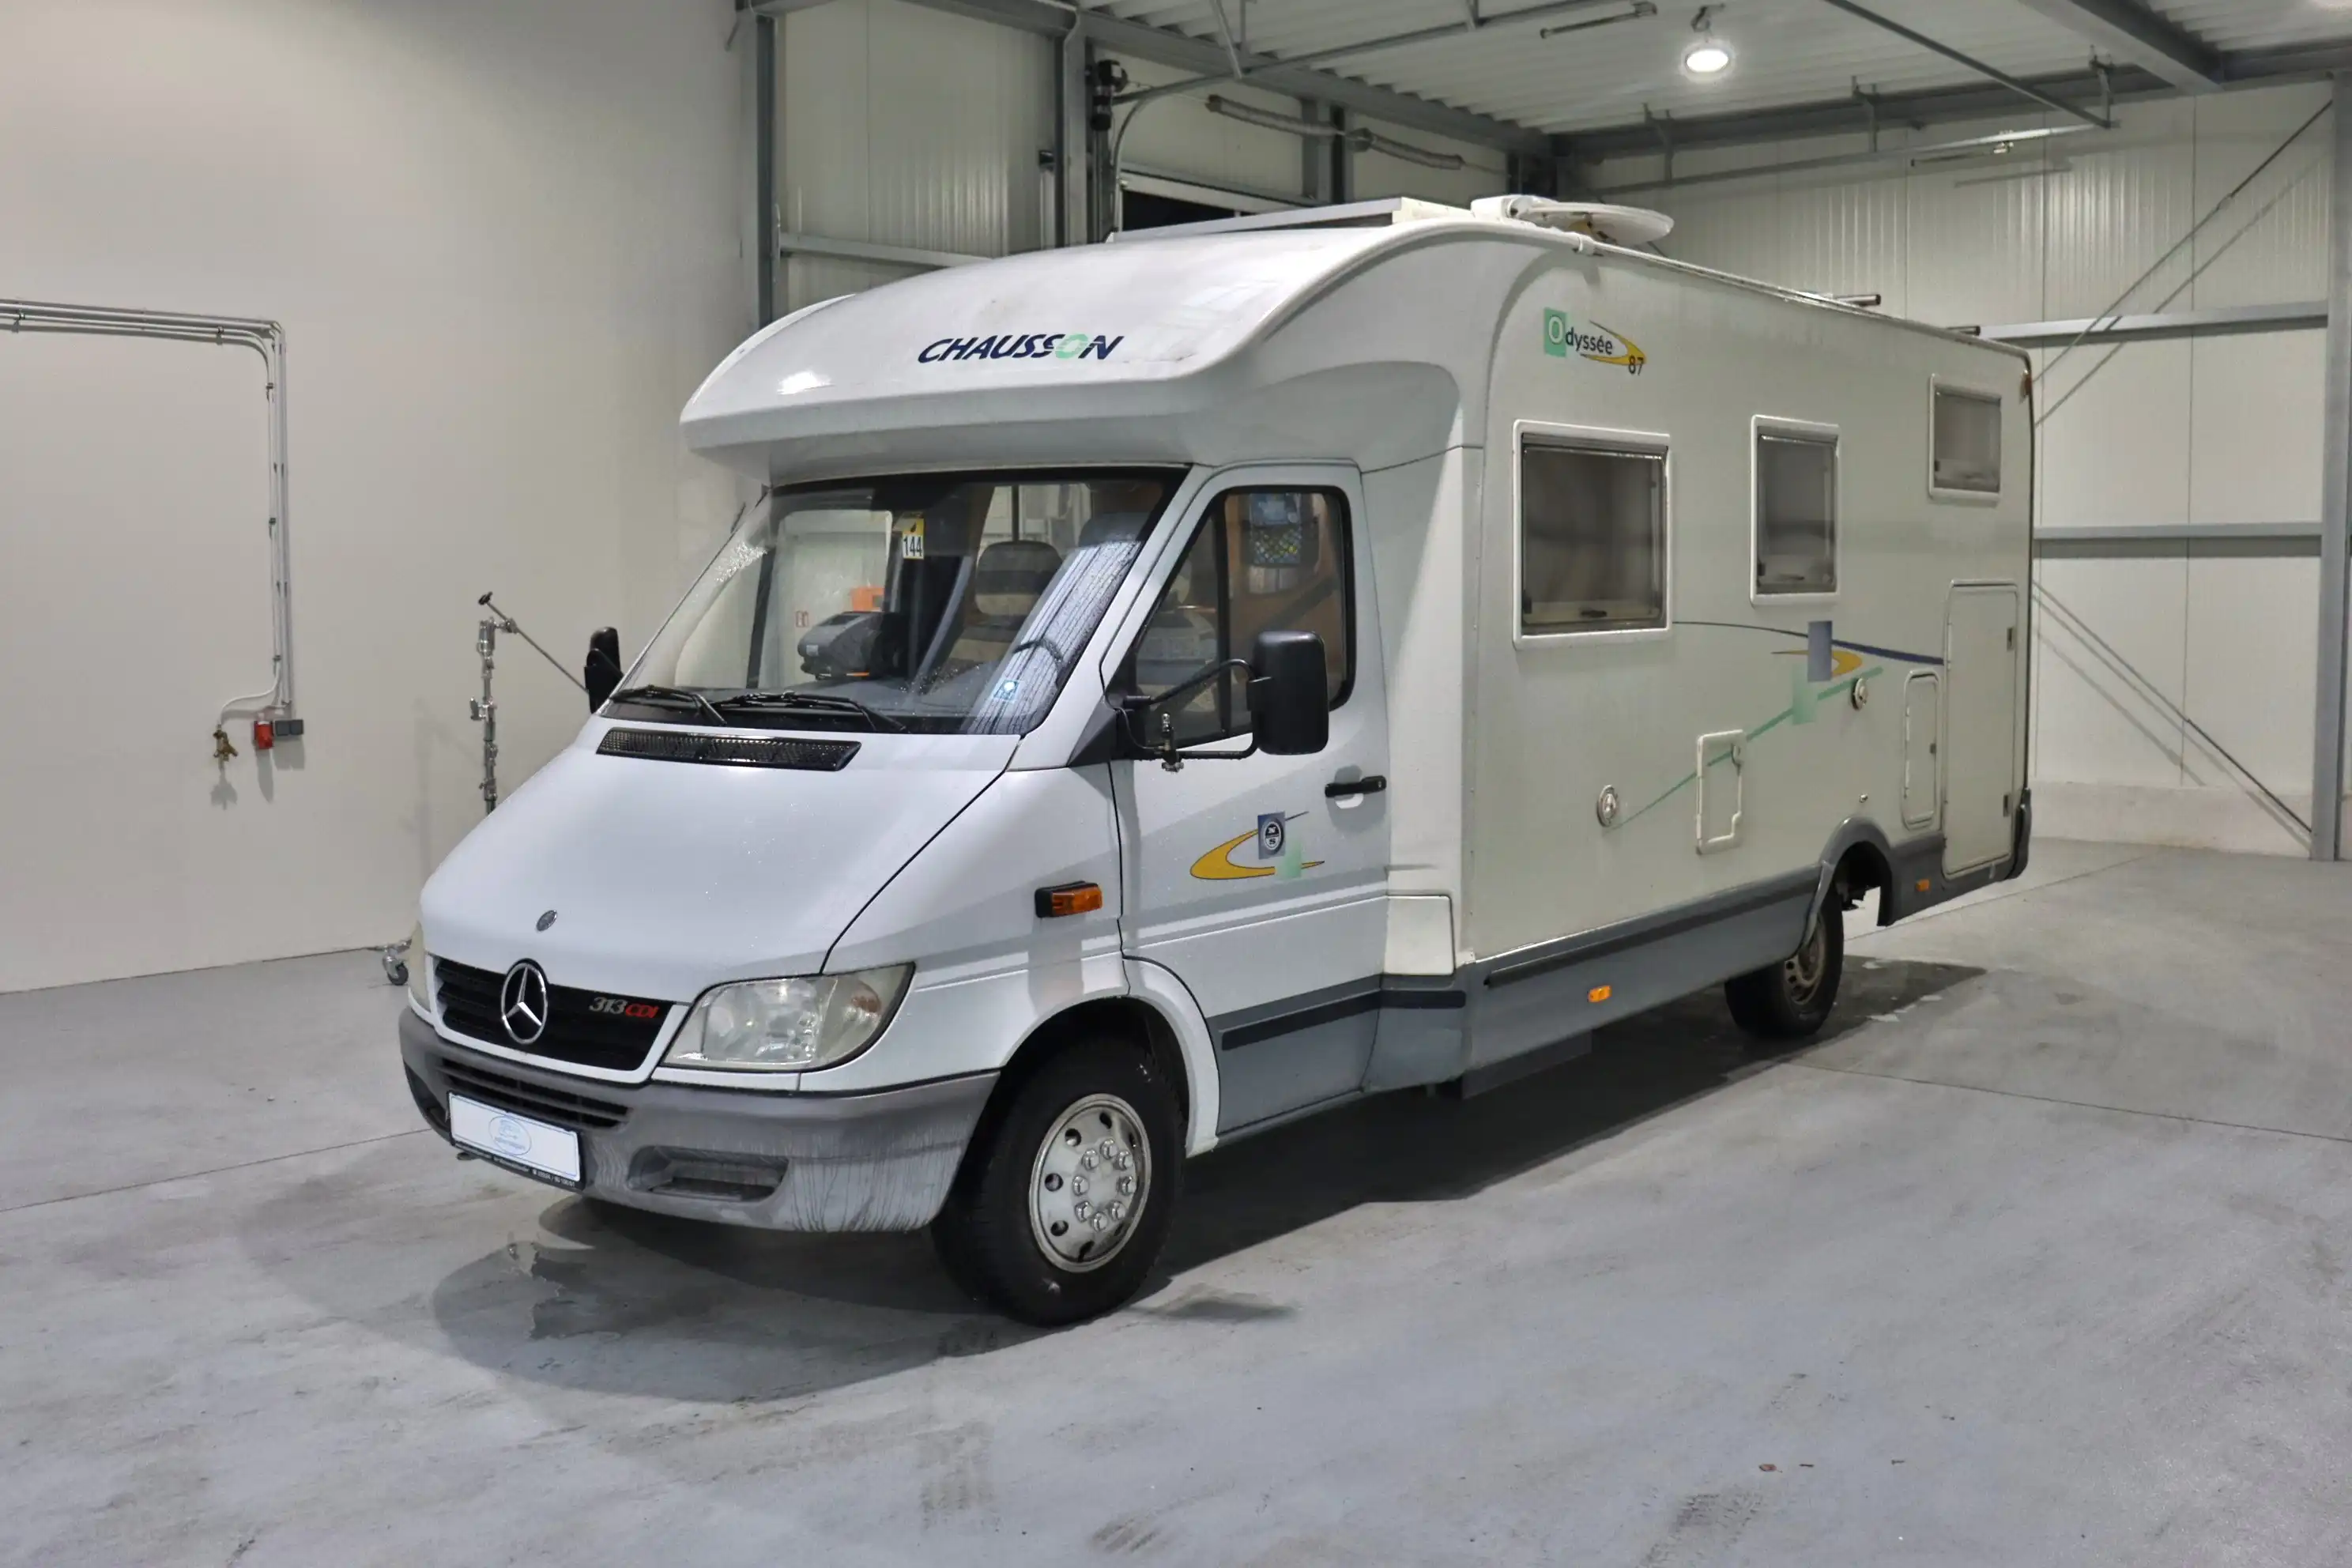 CHAUSSON Odysee 87